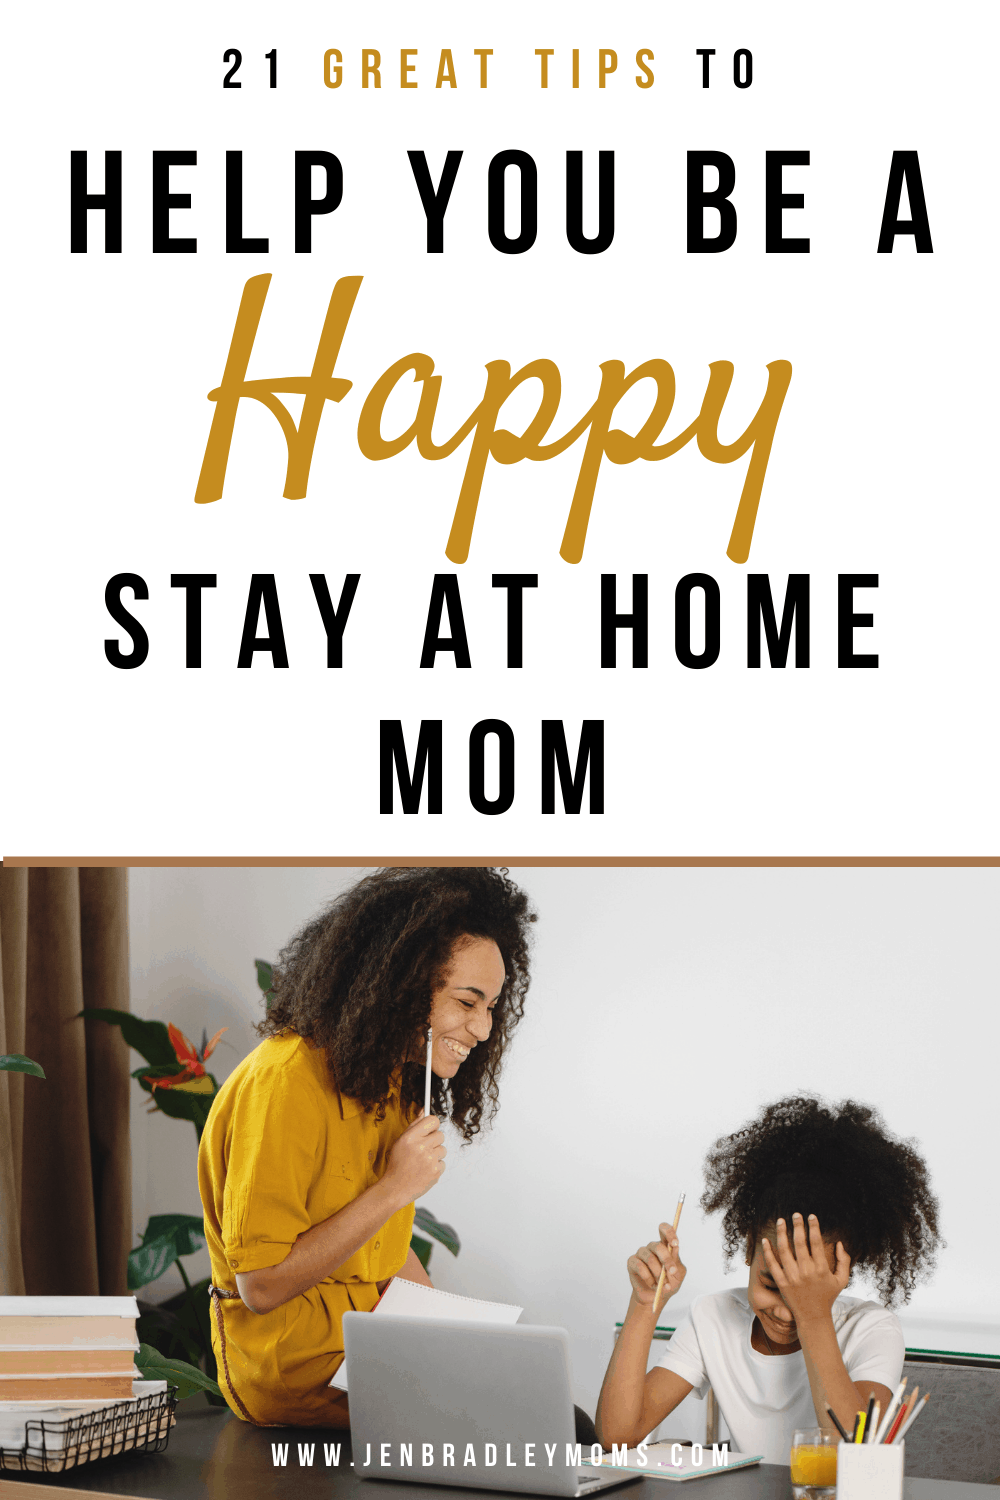 21 Great Ideas to Help You Be a Happy Stay-at-Home Mom